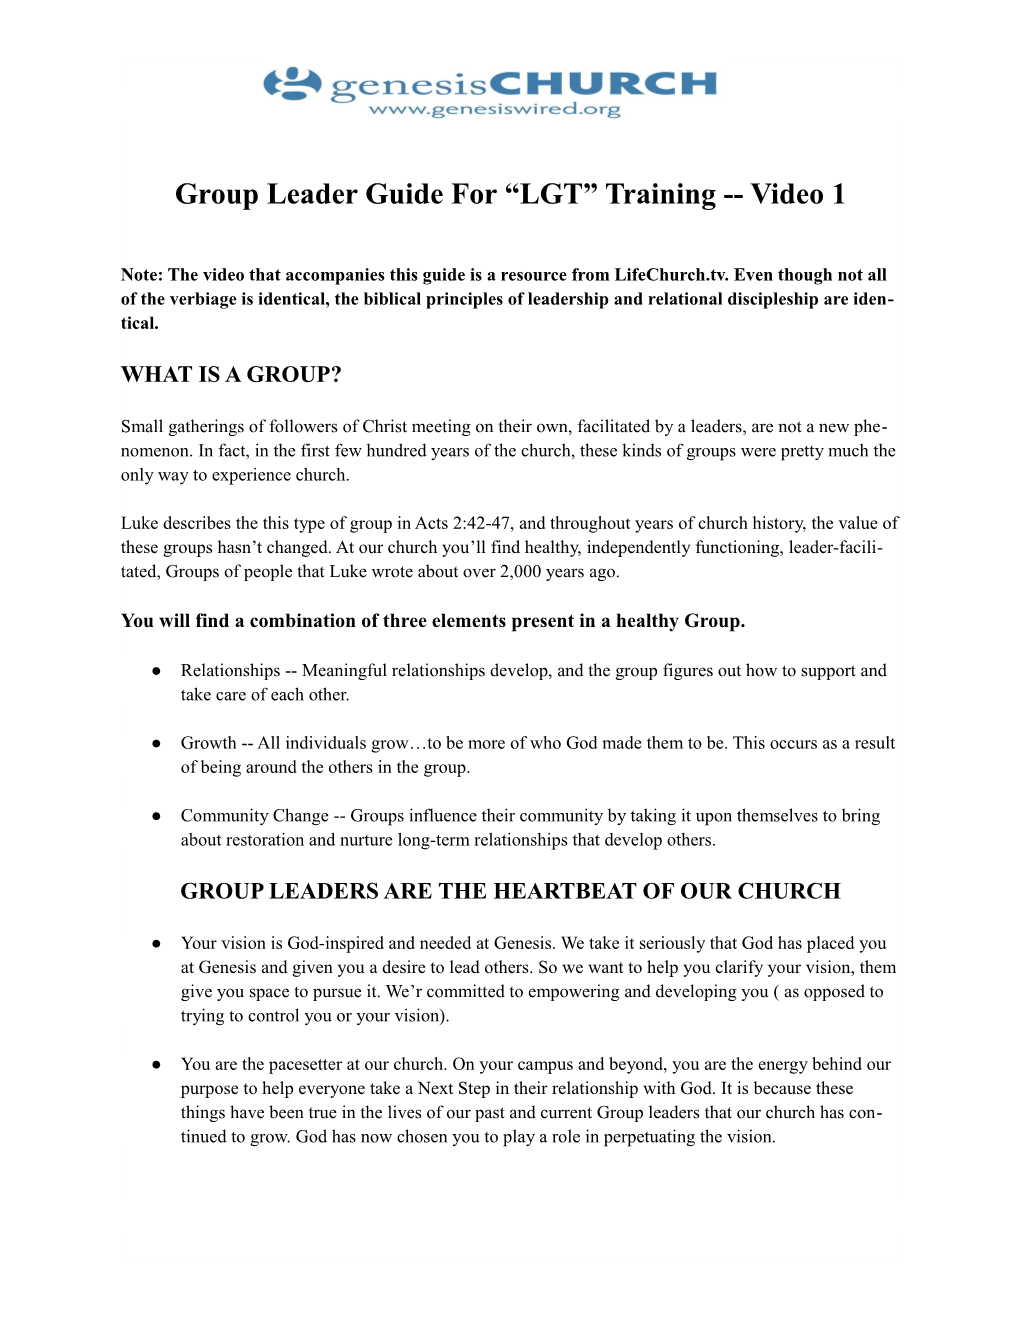 Group Leader Guide for LGT Training Video 1